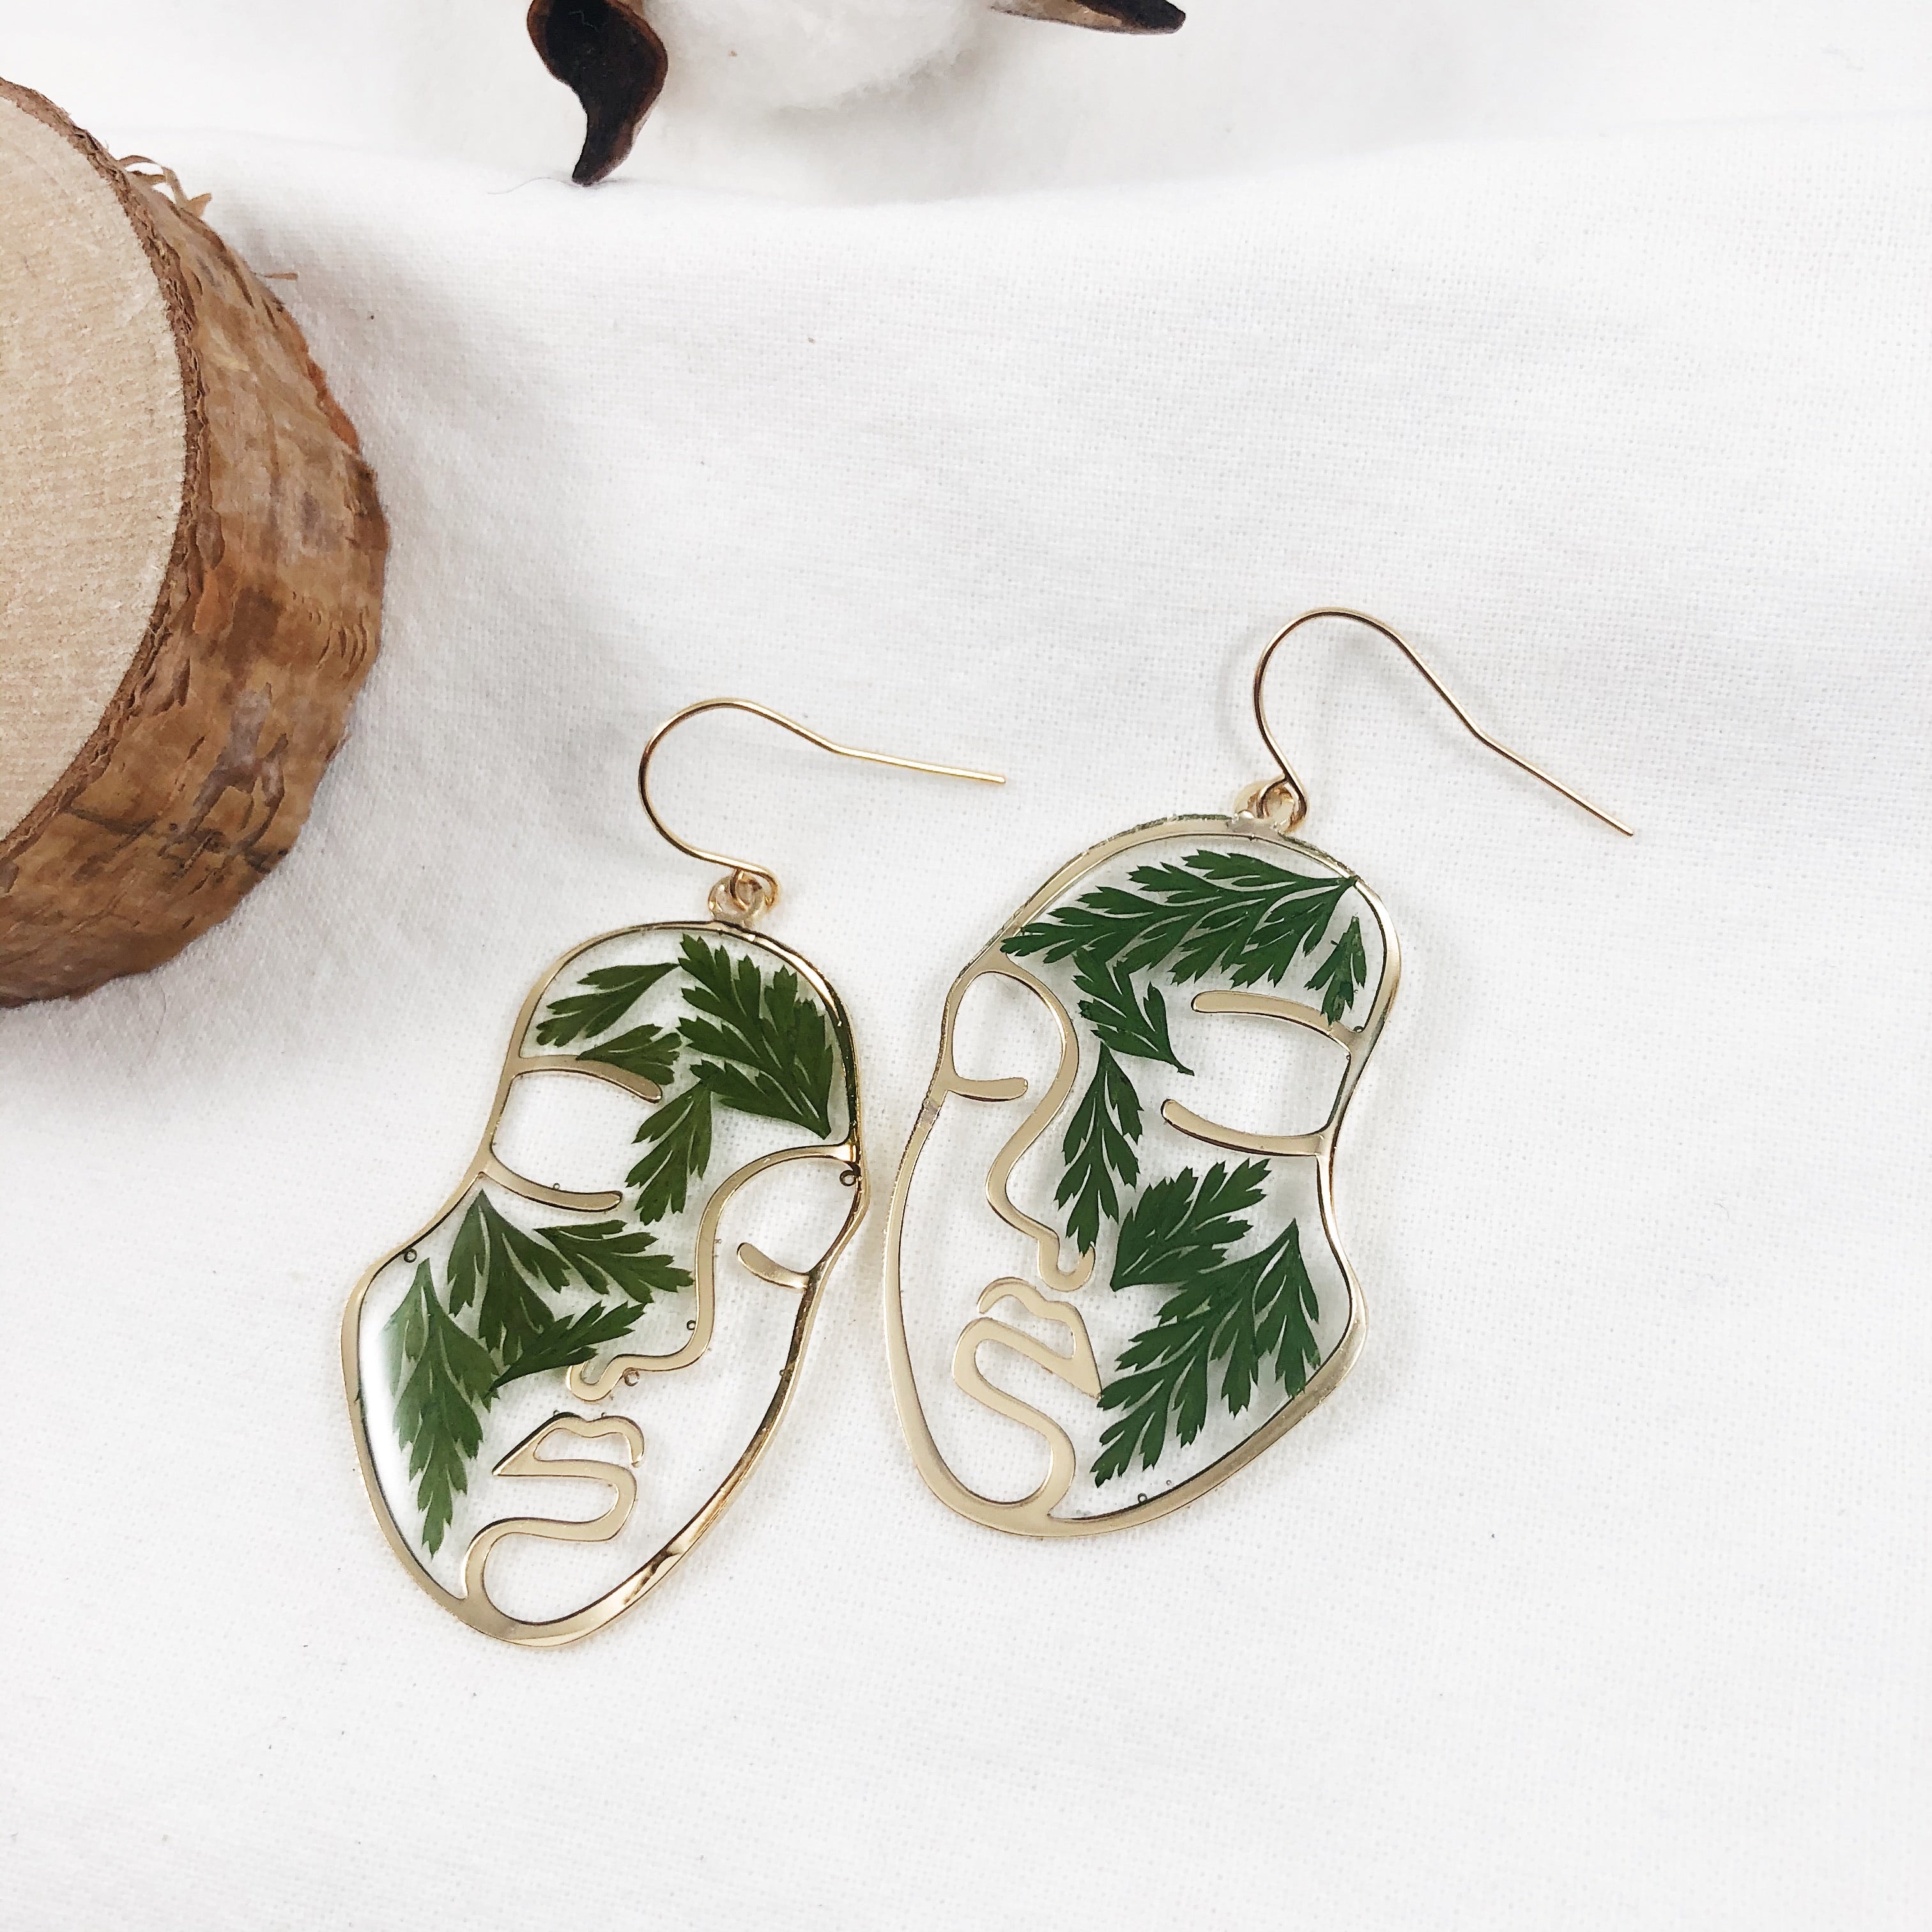 Blythe - Gold Face Earrings with Preserved Ferns